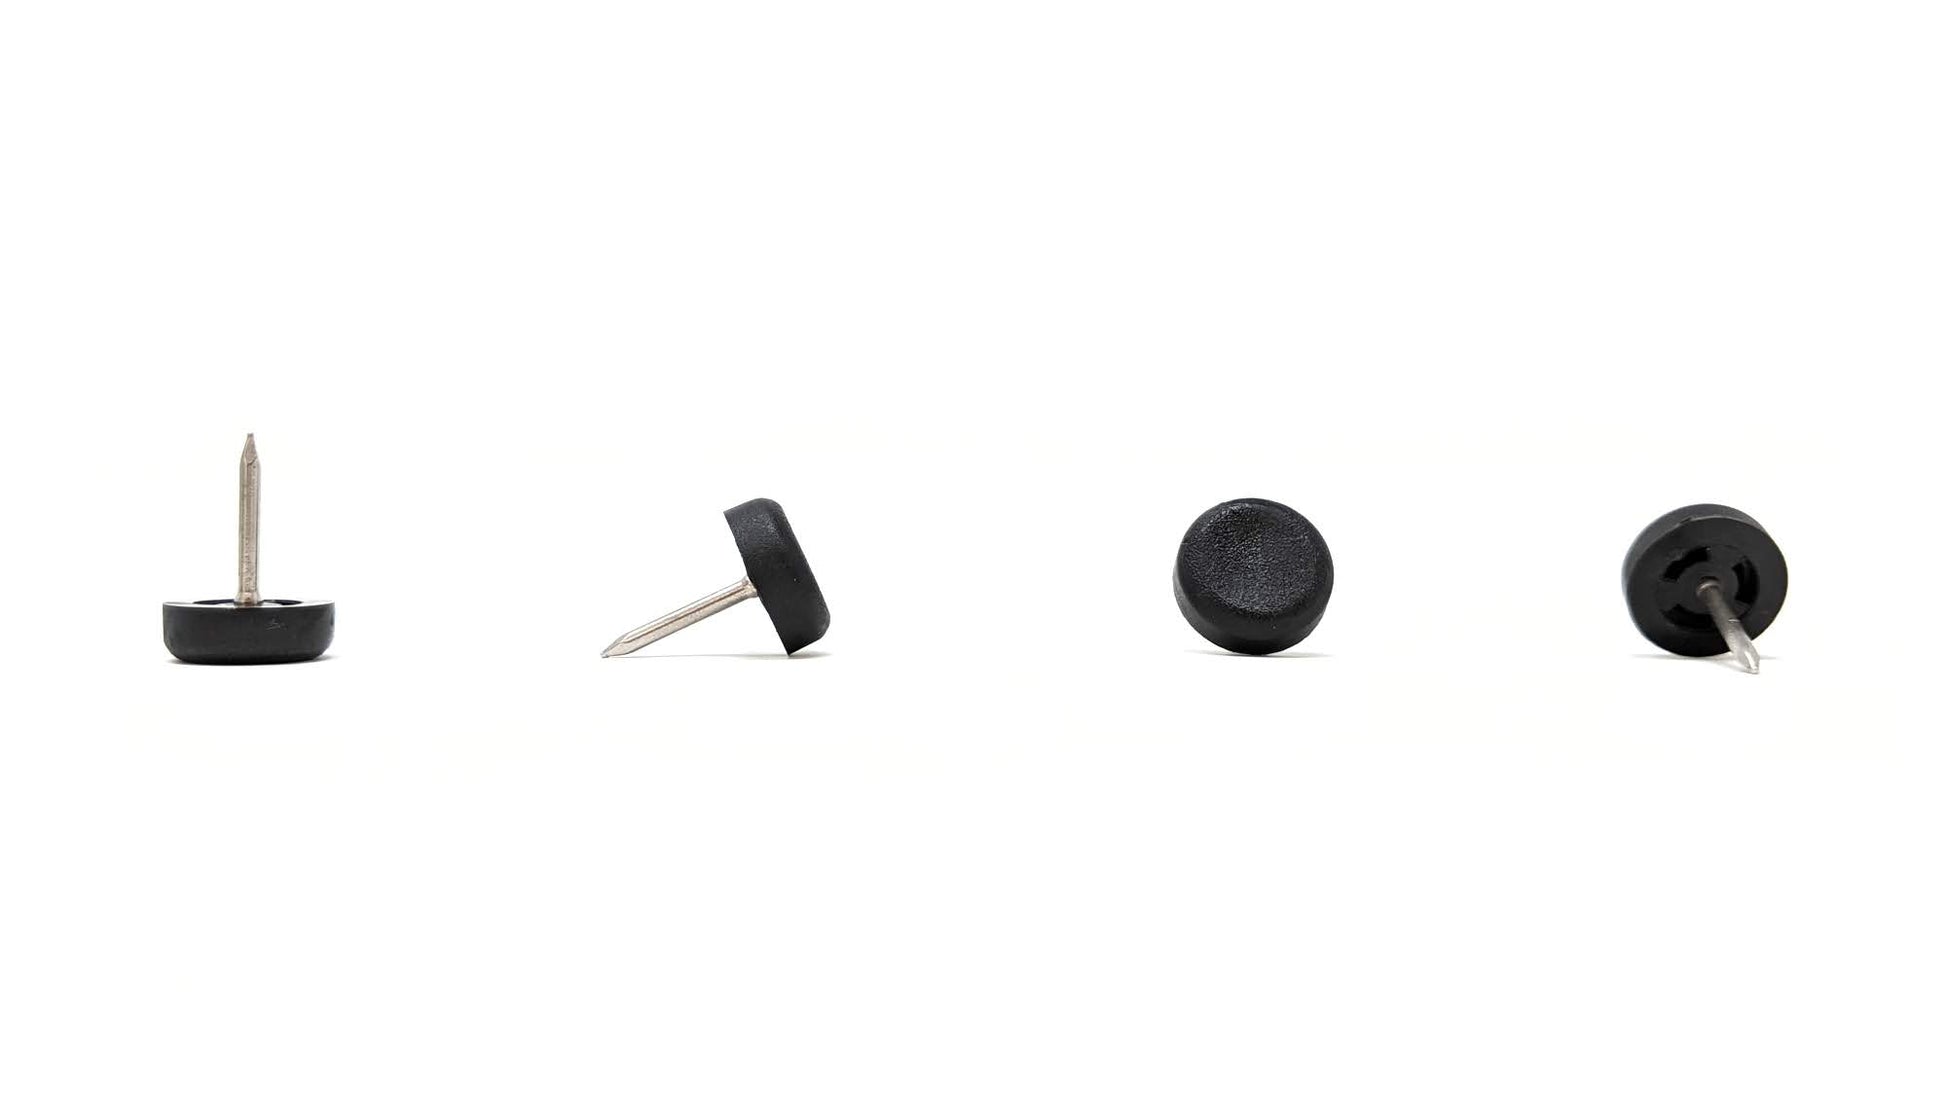 15mm Black Plastic Nail On Gliders - Made in Germany - Keay Vital Parts